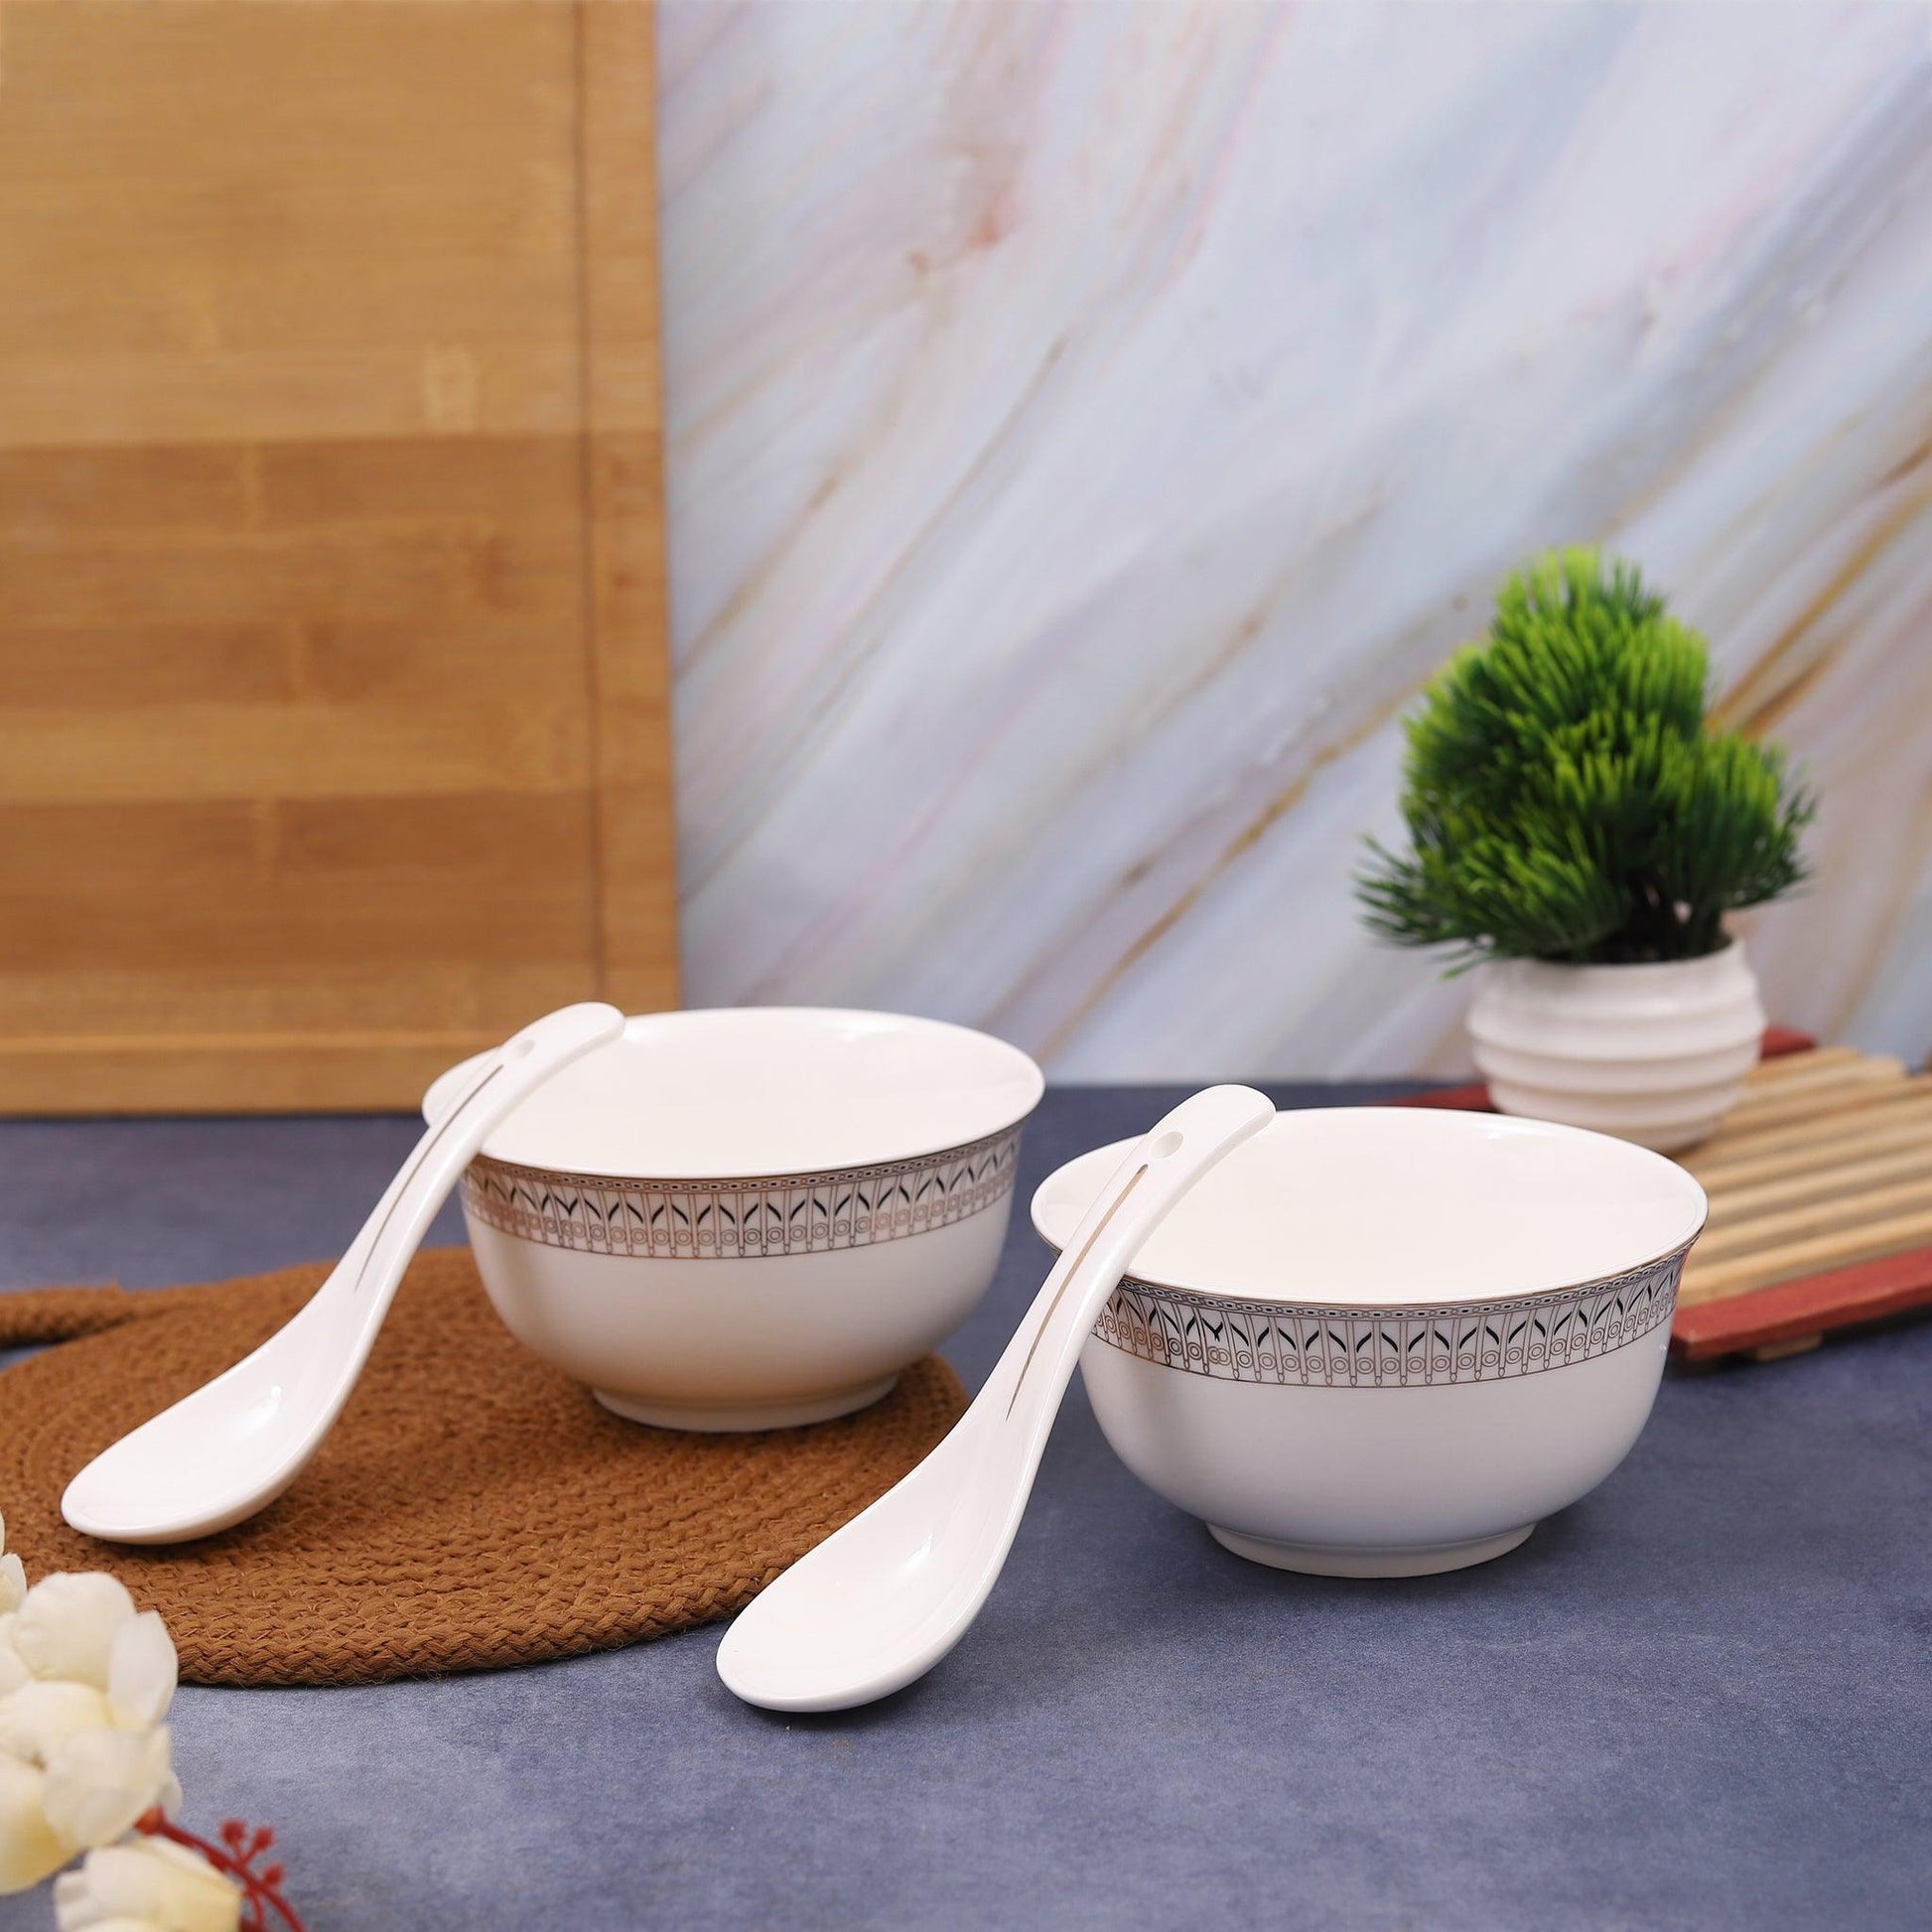 Japanese Symmetrical Design in Silver Soup Bowls with Spoon (Set of 6) - Amora Crockery